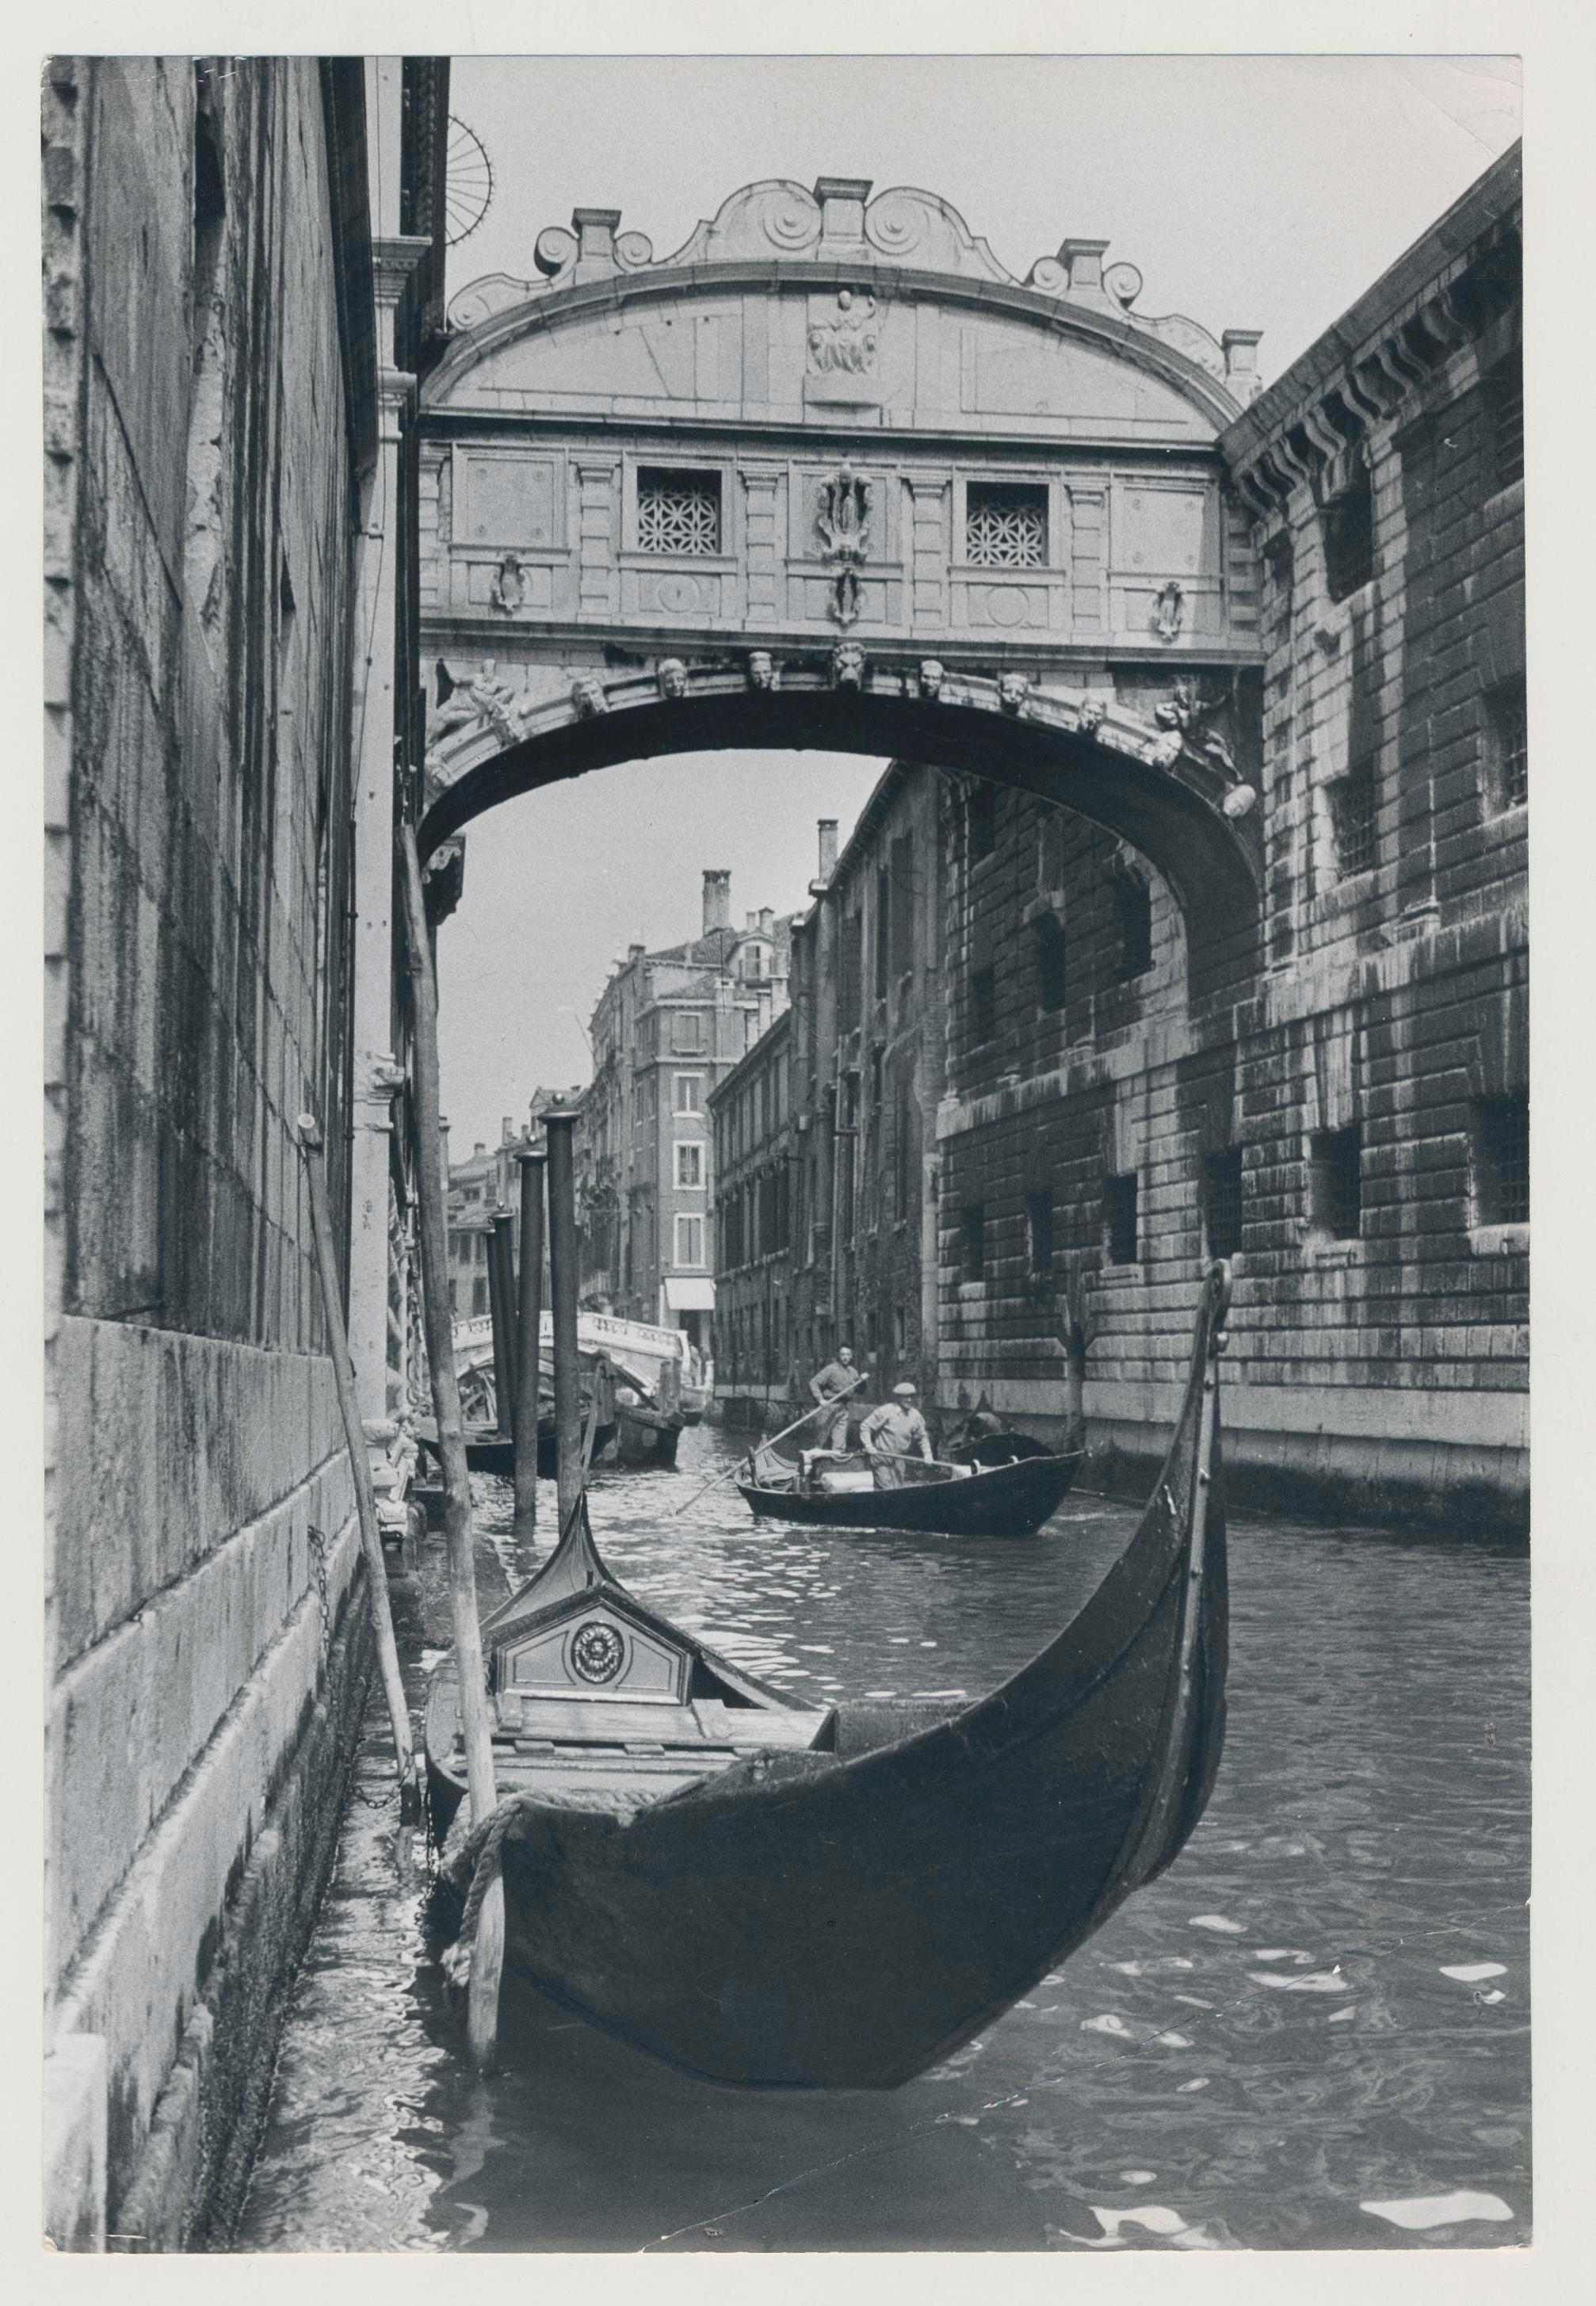 Erich Andres Black and White Photograph - Venice - Gondola on Water and Bridge of Sights, Italy, 1950s, 23, 3 x 15, 9 cm